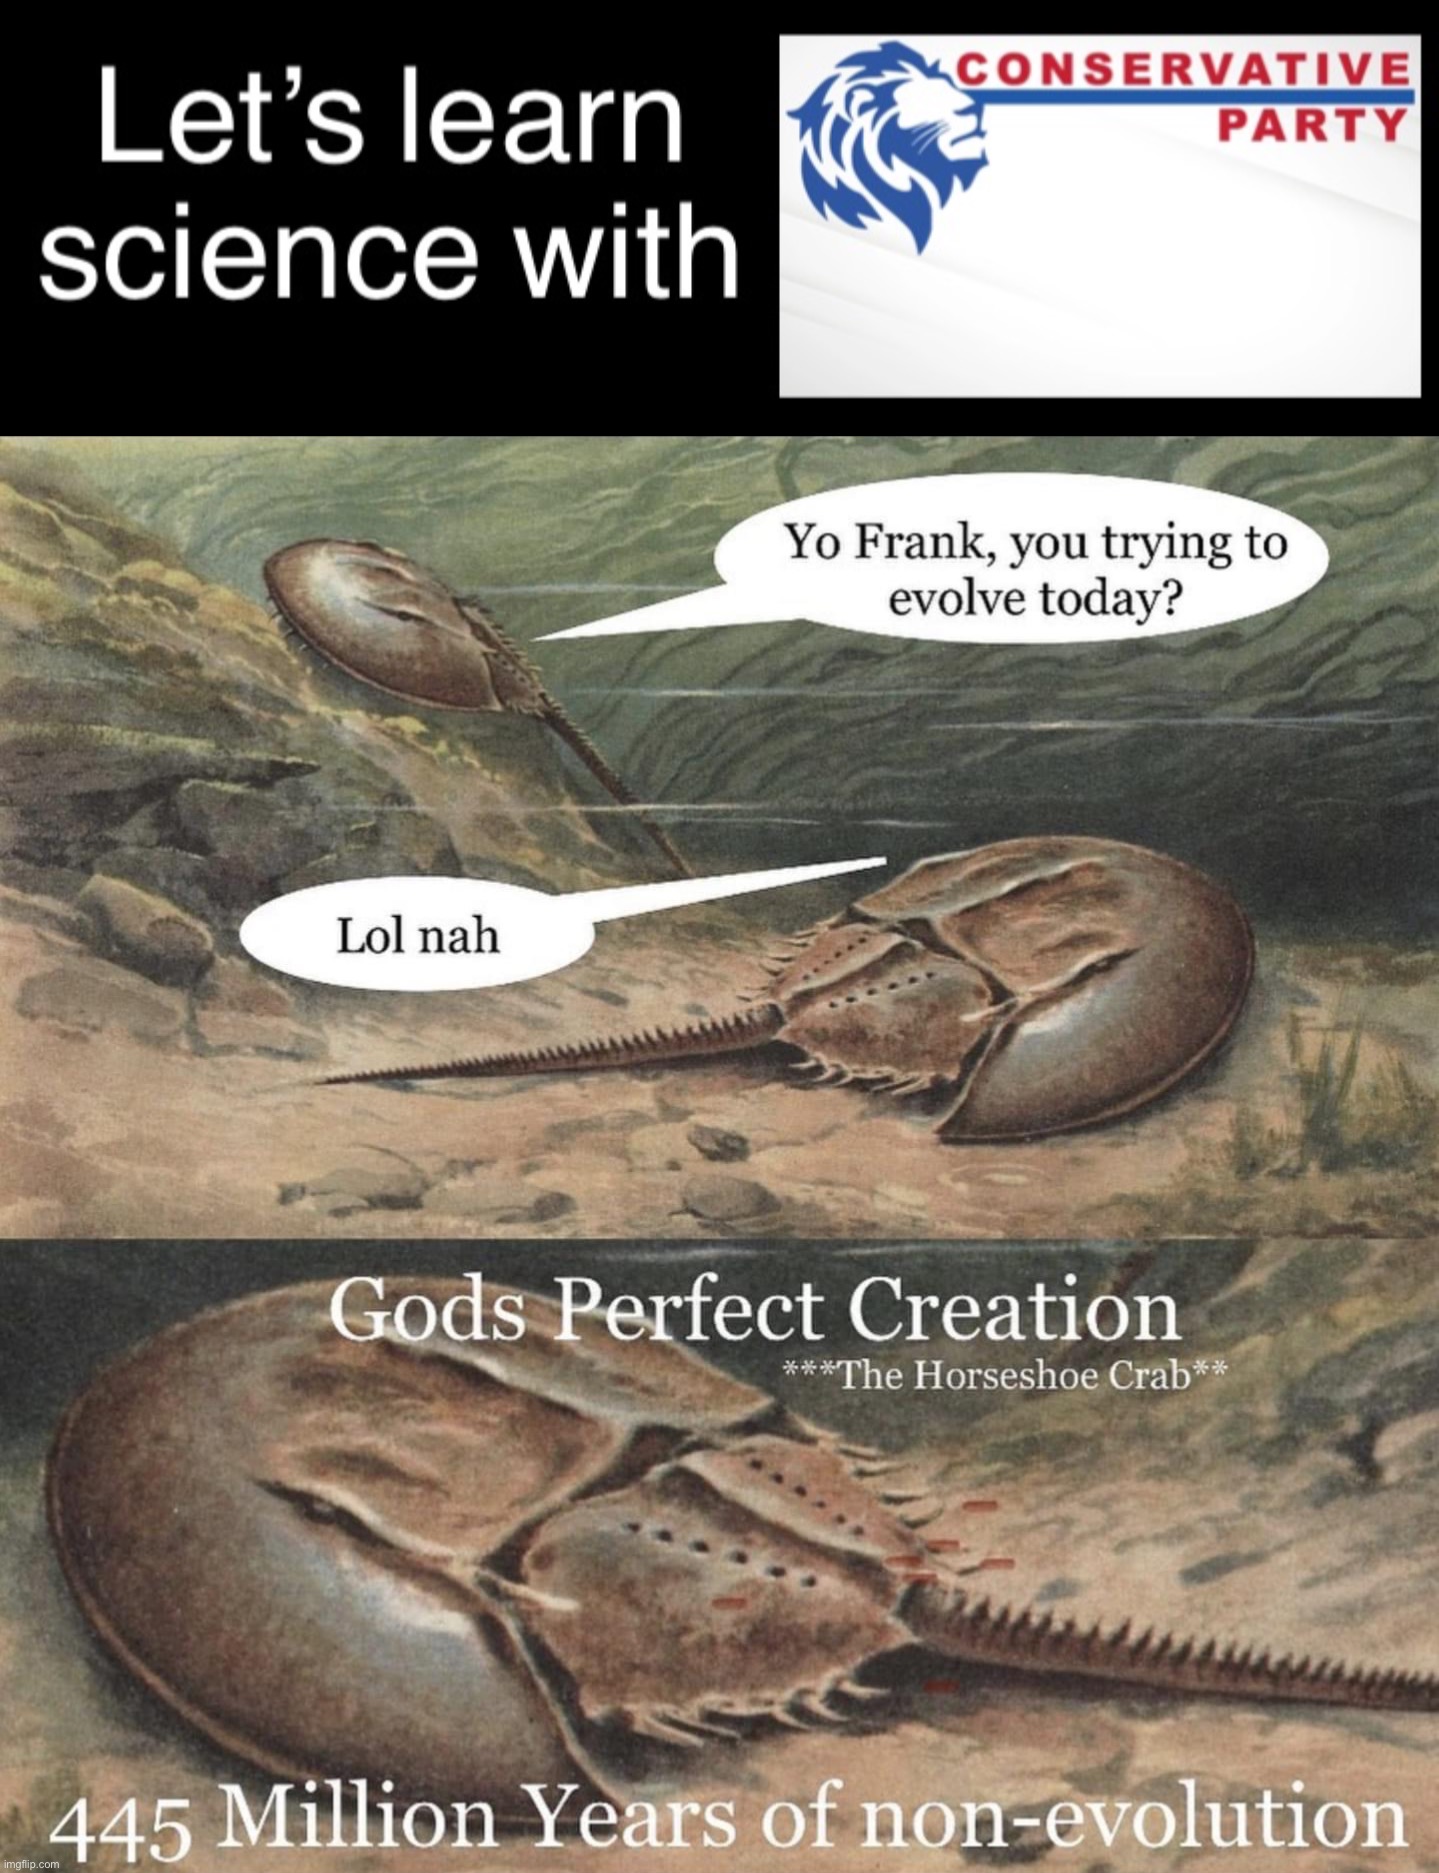 If evolution is a thing, explain this. Checkm8 gg libz | image tagged in let s learn science with conservative party,horseshoe crab,checkm8,gg,libz,libtrads | made w/ Imgflip meme maker